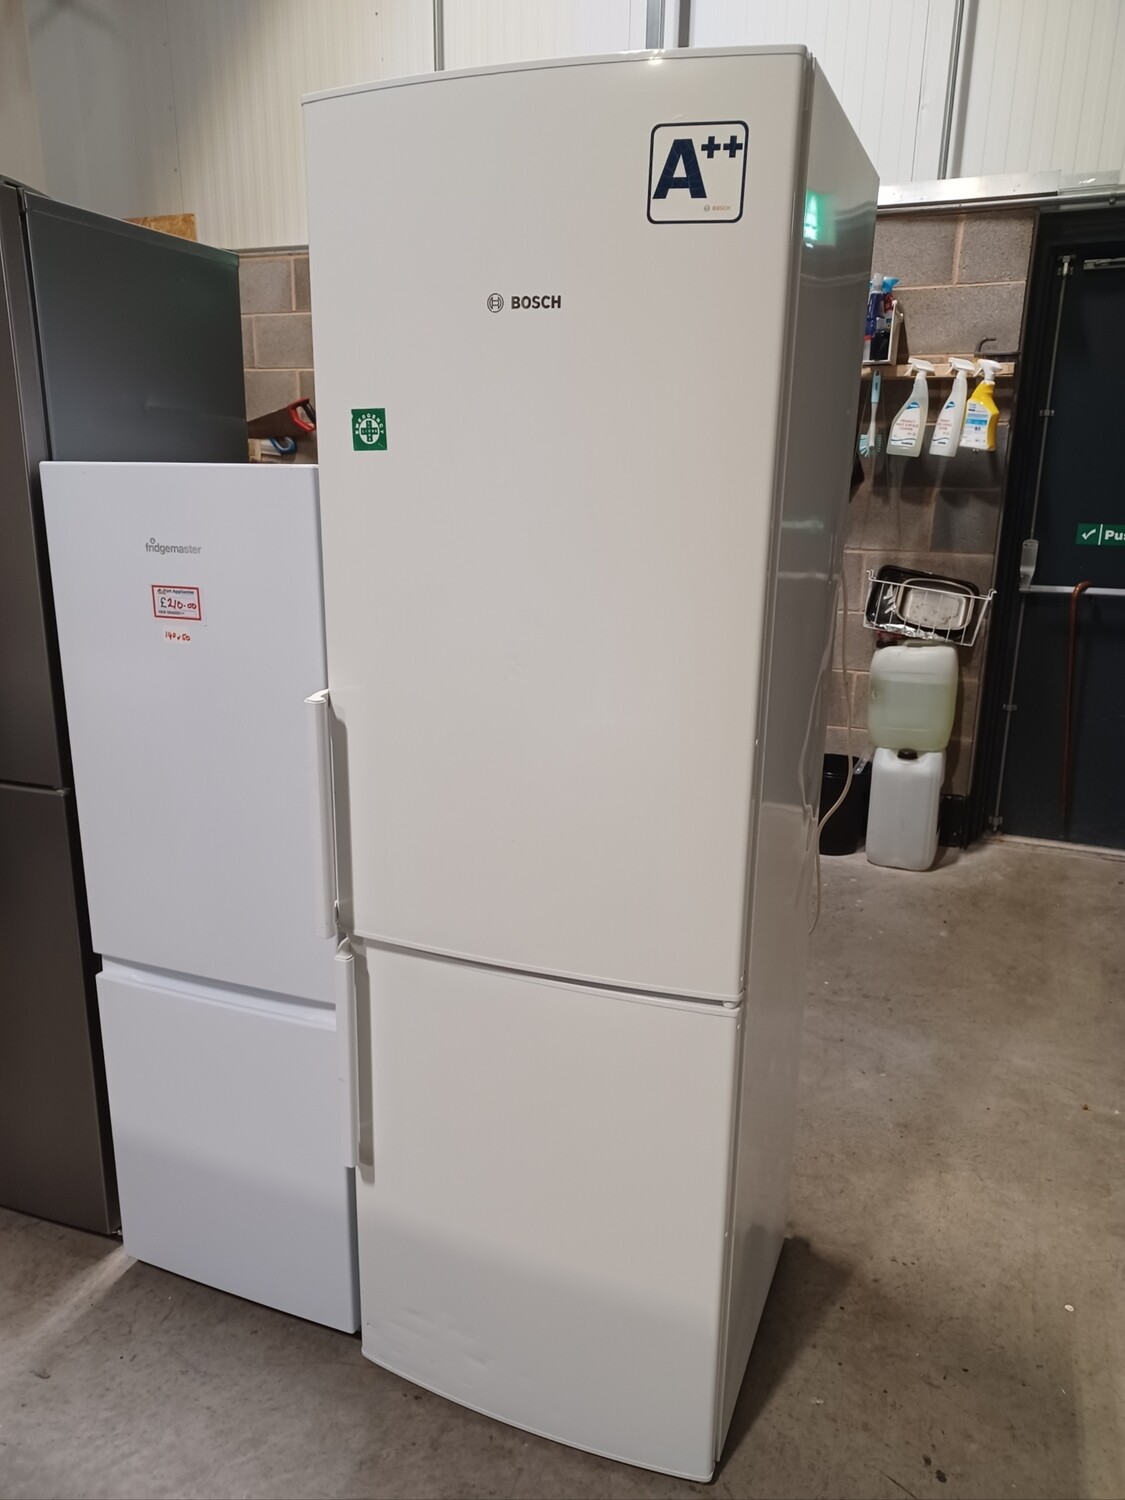 Bosch KGV36X10GB06 Tall Fridge Freezer White  H187 x W60 Refurbished. This item is located in our Whitby Road Shop